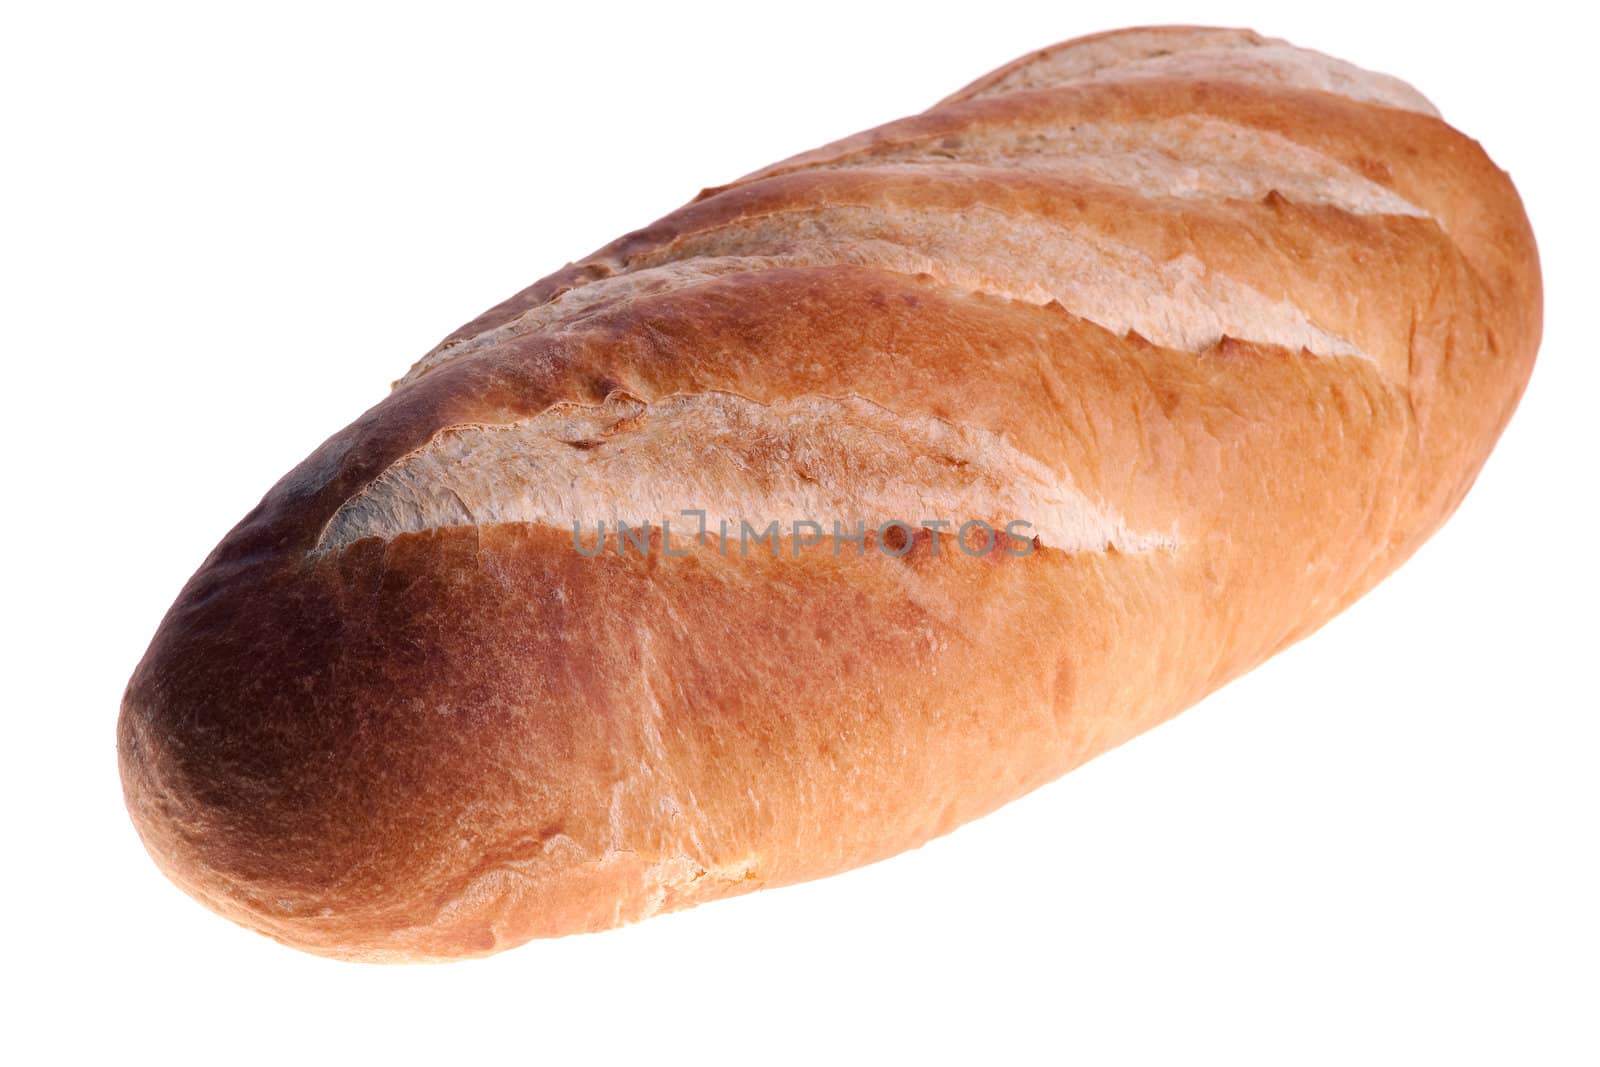 Loaf of bread by Marcus